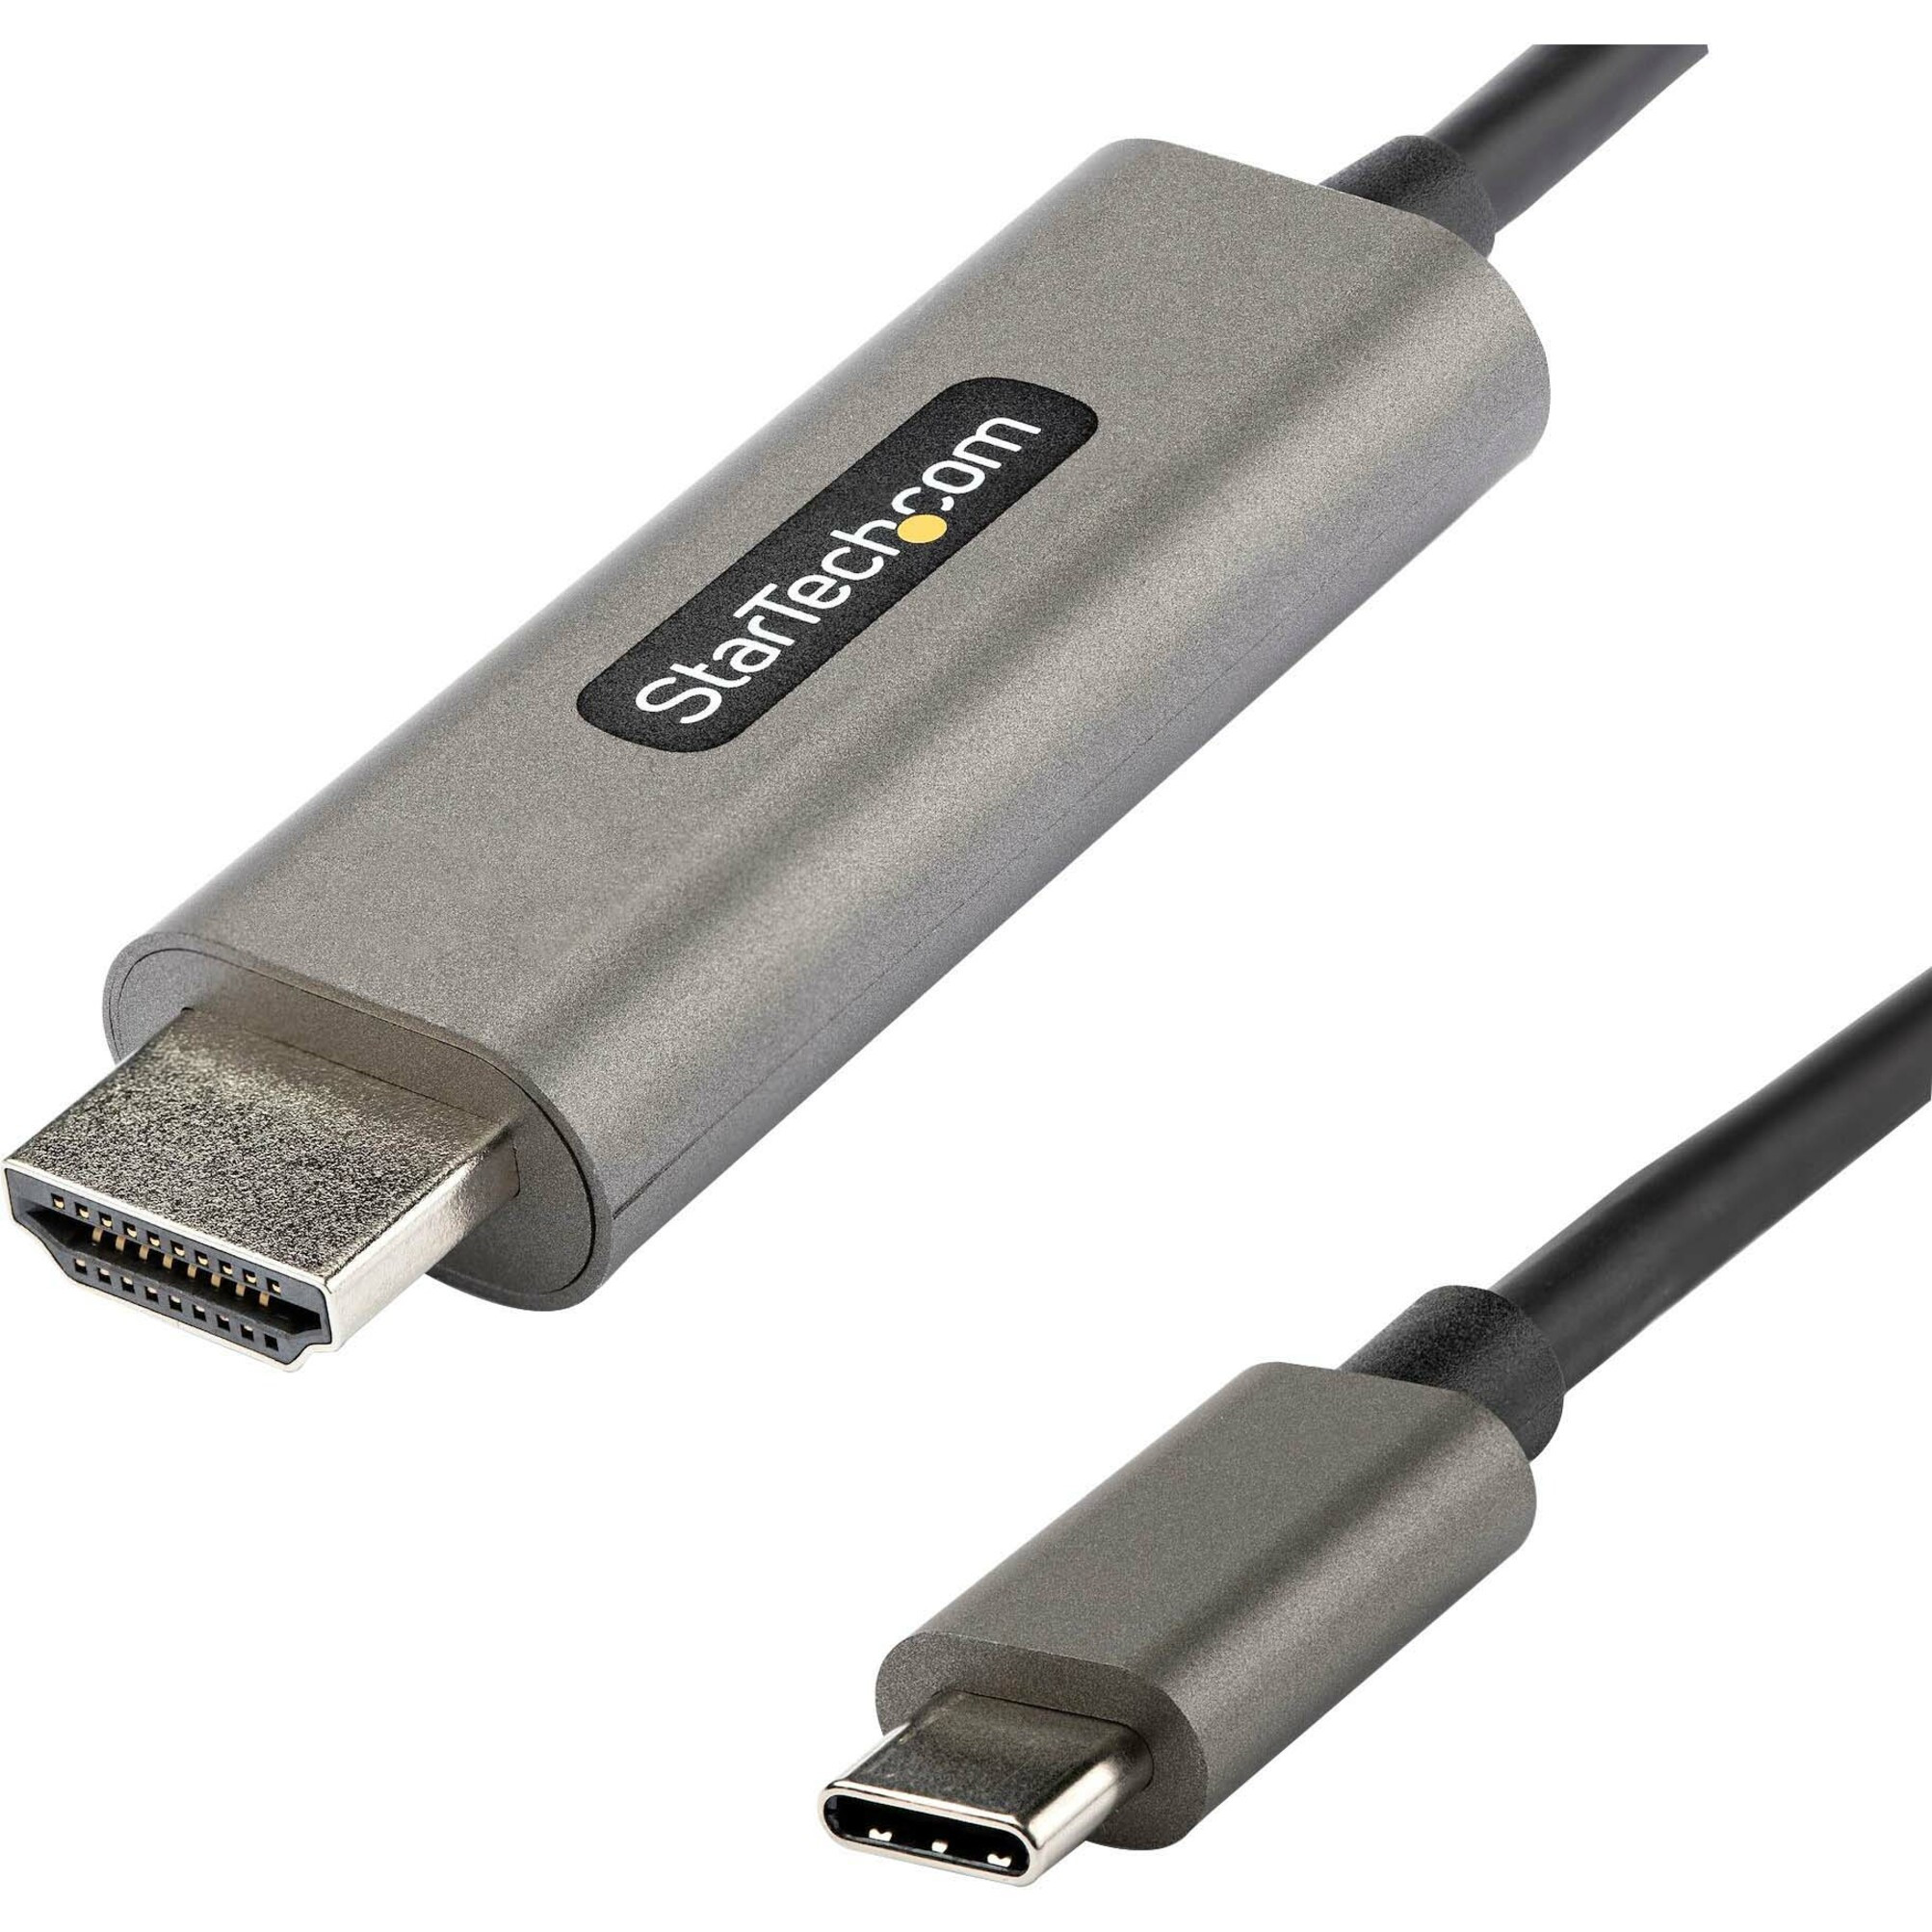 Startech .com 13ft (4m) USB C to HDMI Cable 4K 60Hz with HDR10, Ultra HD  USB Type-C to HDMI 2.0b Video Adapter Cable, DP 1.4 Alt Mode HBR3 